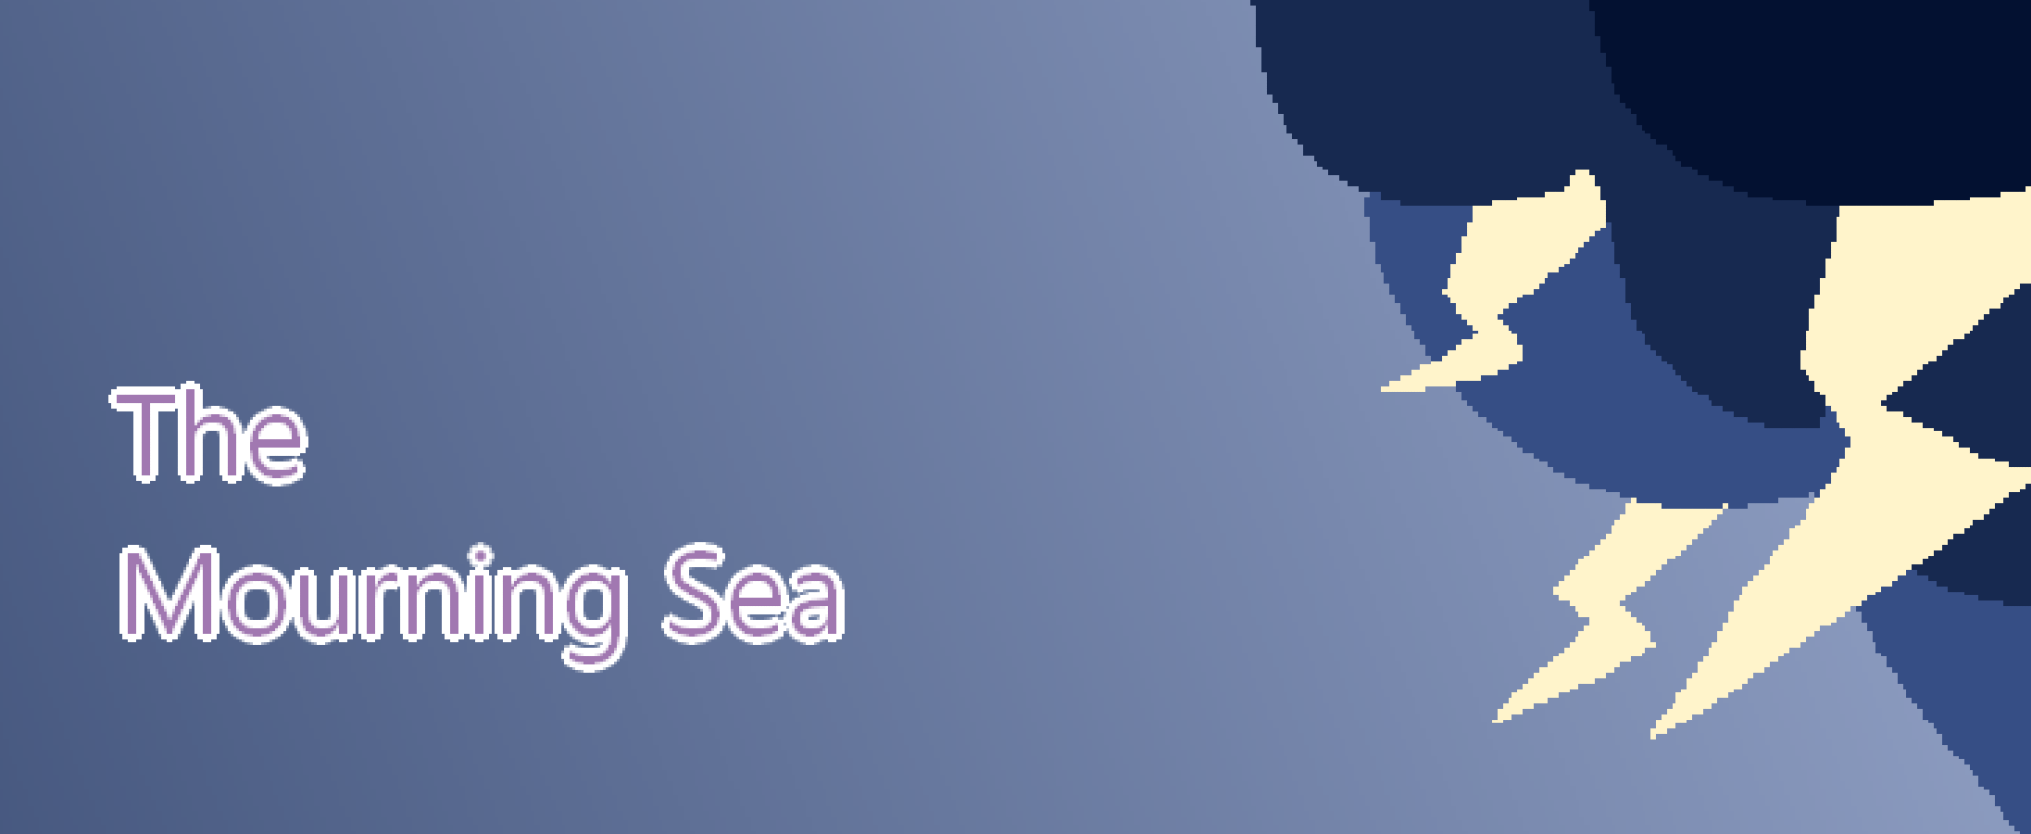 The Mourning Sea